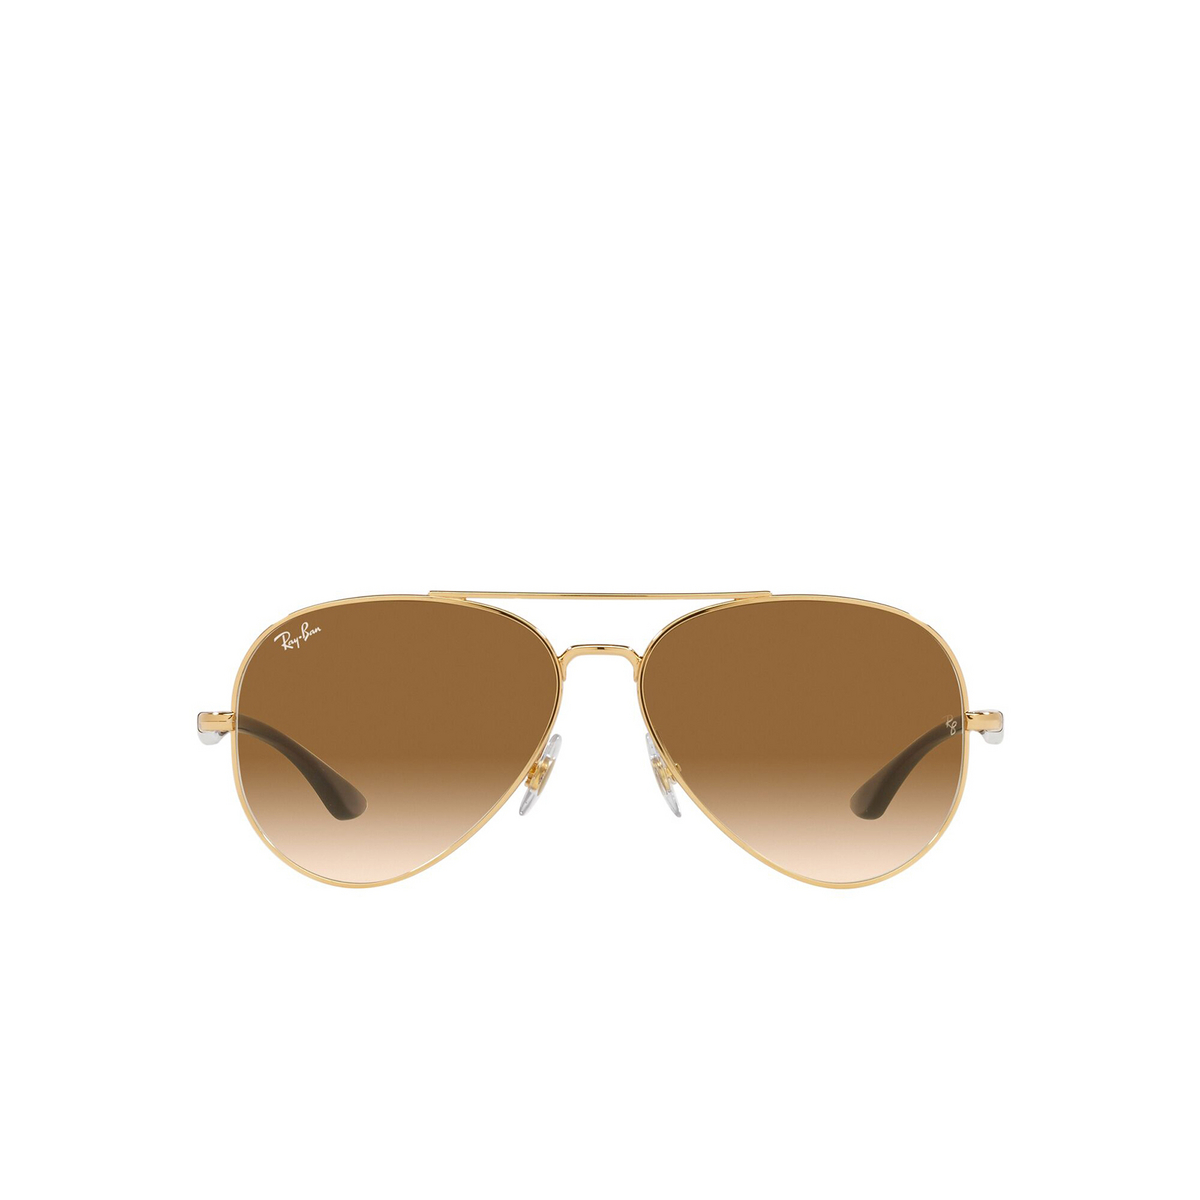 Ray-Ban® Aviator Sunglasses: RB3675 color Arista 001/51 - front view.